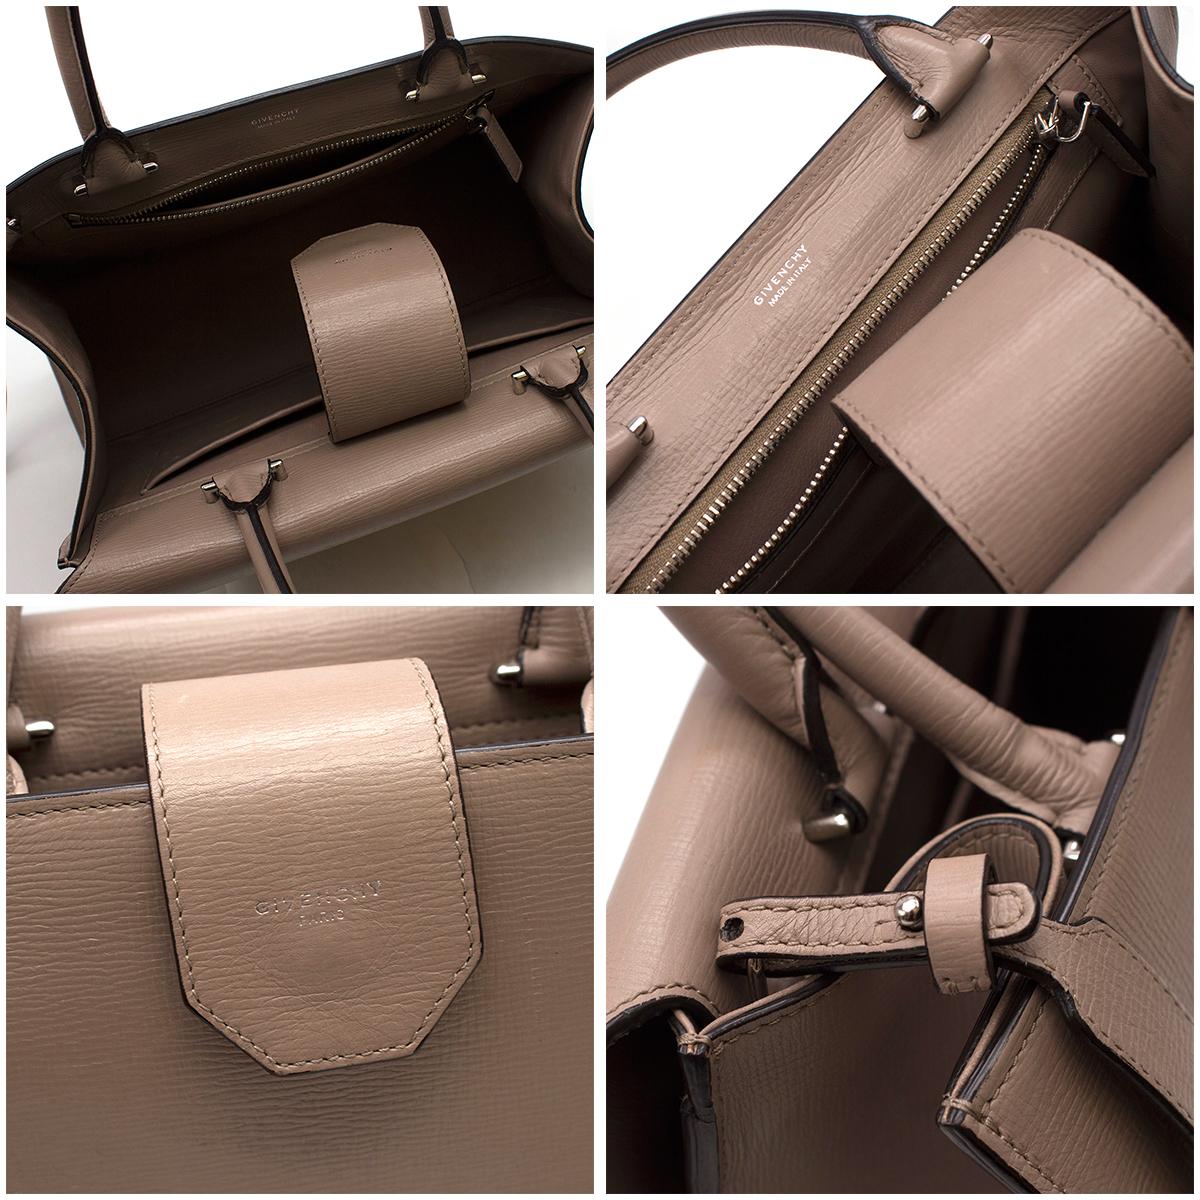 Givenchy Medium Taupe Obsedia Satchel For Sale 2